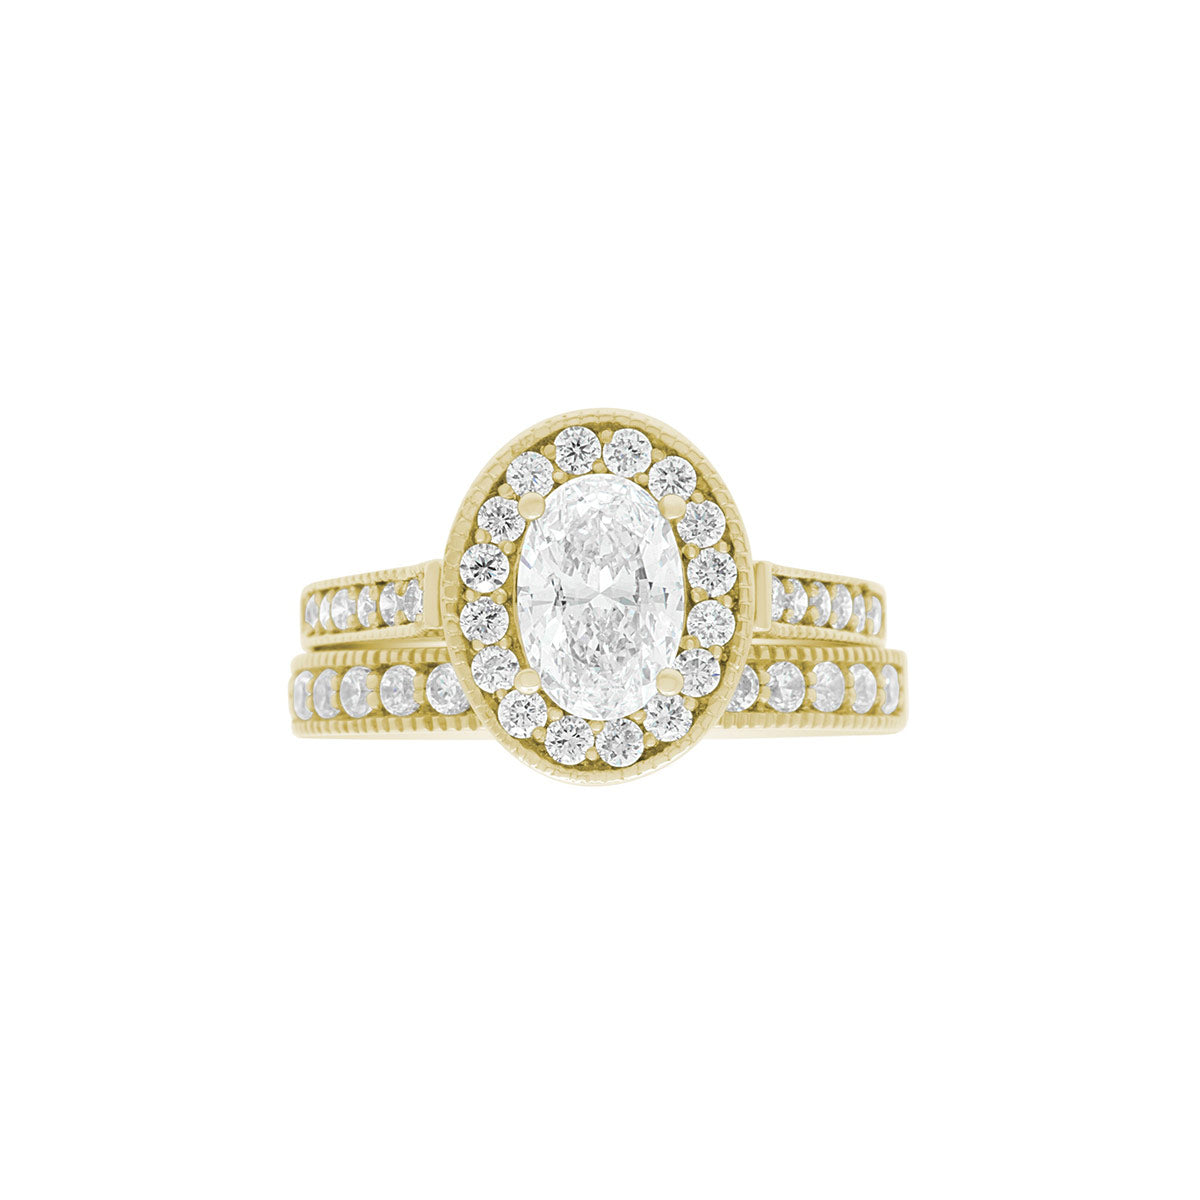 Antique Oval Engagement Ring in Yellow gold with a matching diamond set wedding ring